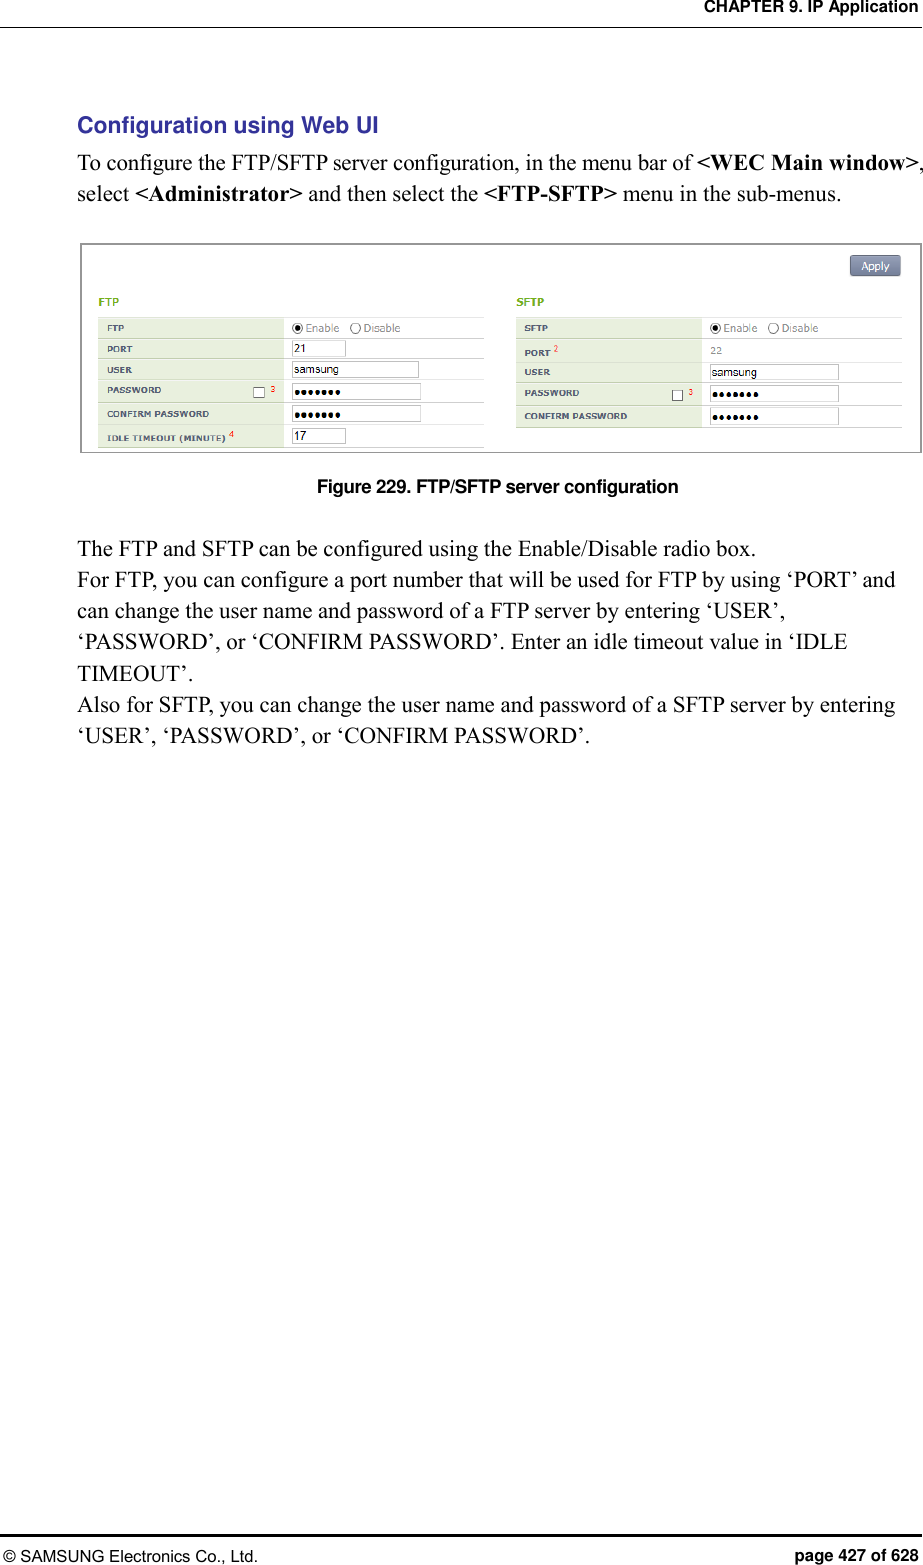 CHAPTER 9. IP Application © SAMSUNG Electronics Co., Ltd.  page 427 of 628 Configuration using Web UI To configure the FTP/SFTP server configuration, in the menu bar of &lt;WEC Main window&gt;, select &lt;Administrator&gt; and then select the &lt;FTP-SFTP&gt; menu in the sub-menus.  Figure 229. FTP/SFTP server configuration  The FTP and SFTP can be configured using the Enable/Disable radio box. For FTP, you can configure a port number that will be used for FTP by using ‘PORT’ and can change the user name and password of a FTP server by entering ‘USER’, ‘PASSWORD’, or ‘CONFIRM PASSWORD’. Enter an idle timeout value in ‘IDLE TIMEOUT’. Also for SFTP, you can change the user name and password of a SFTP server by entering ‘USER’, ‘PASSWORD’, or ‘CONFIRM PASSWORD’.  